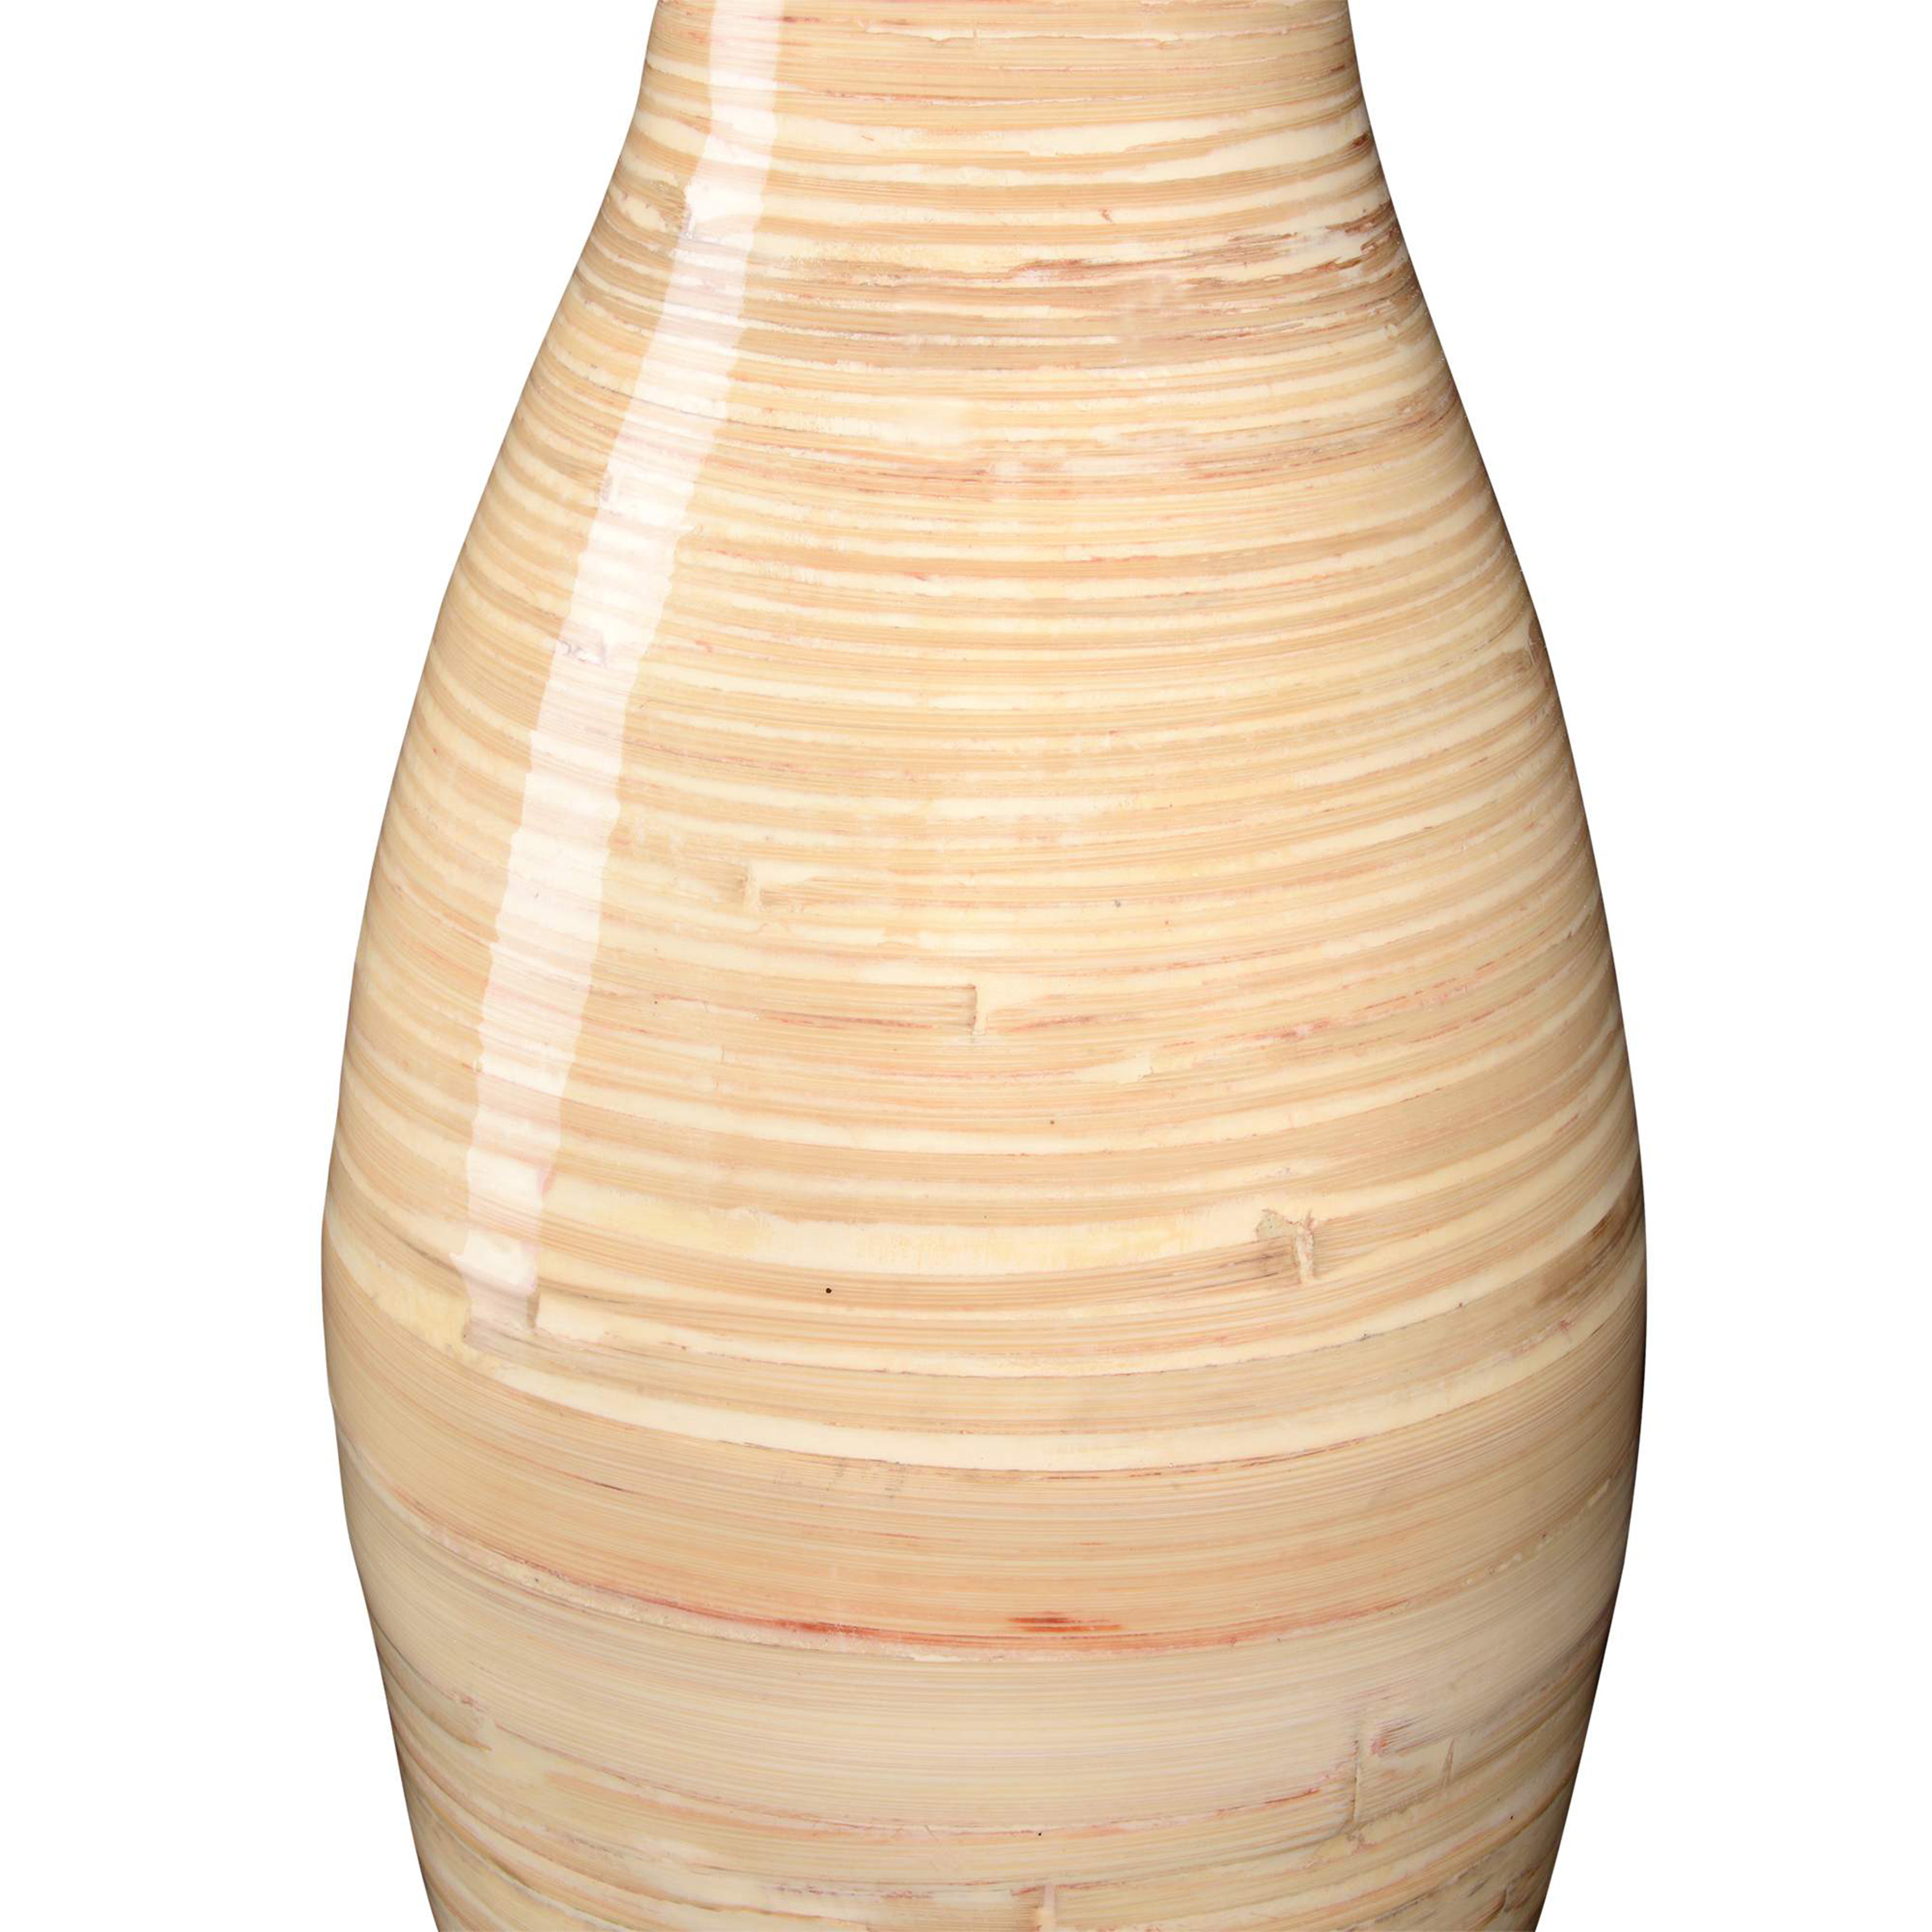 Villacera Handcrafted 20-Inch-Tall Sustainable Bamboo Floor Vase (Natural) - image 2 of 6